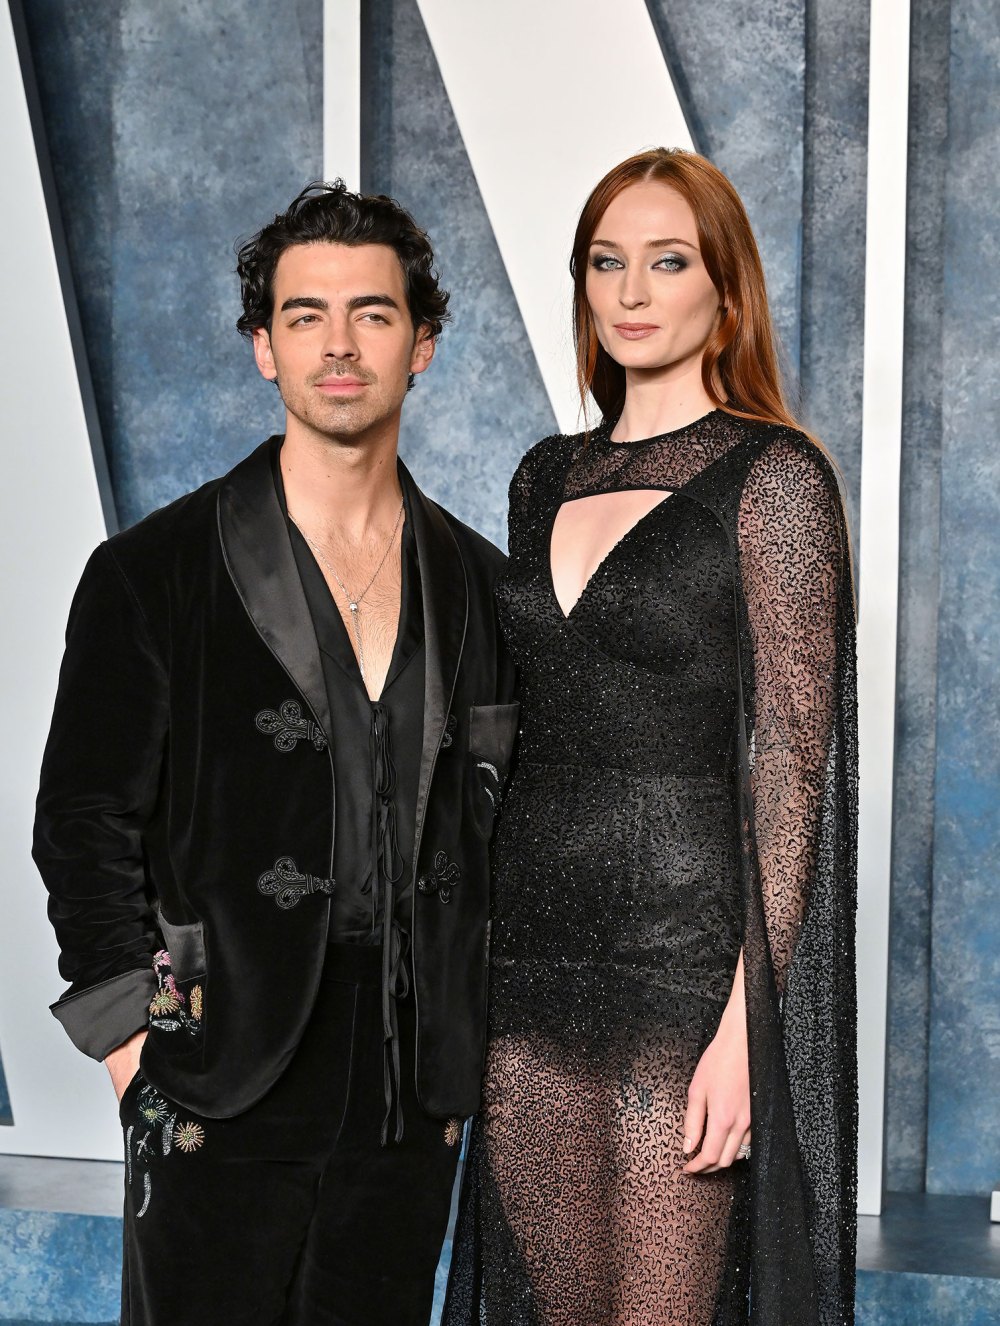 Joe Jonas Relaxes With Friends at Formula 1 Race After Custody Battle Sophie Turner